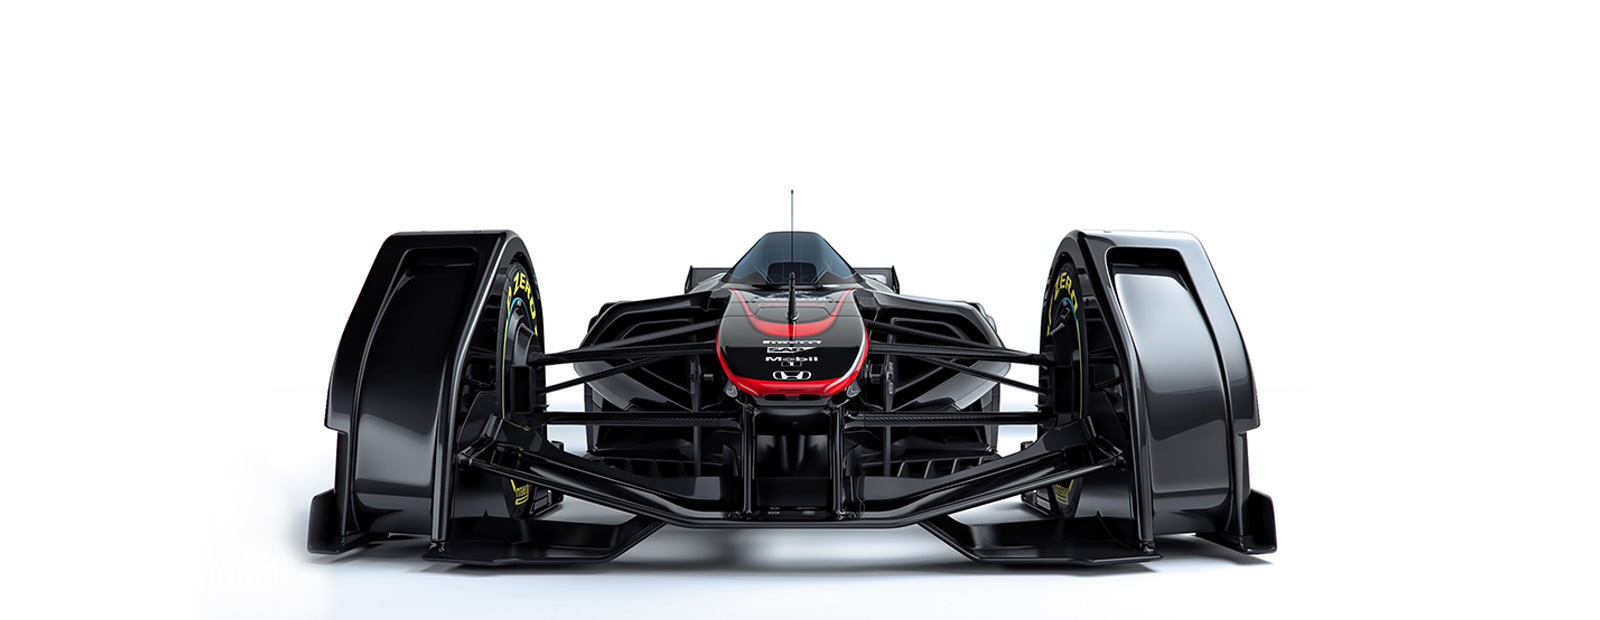 Fine Art: The Race Car Of The Future Is A Work Of Art